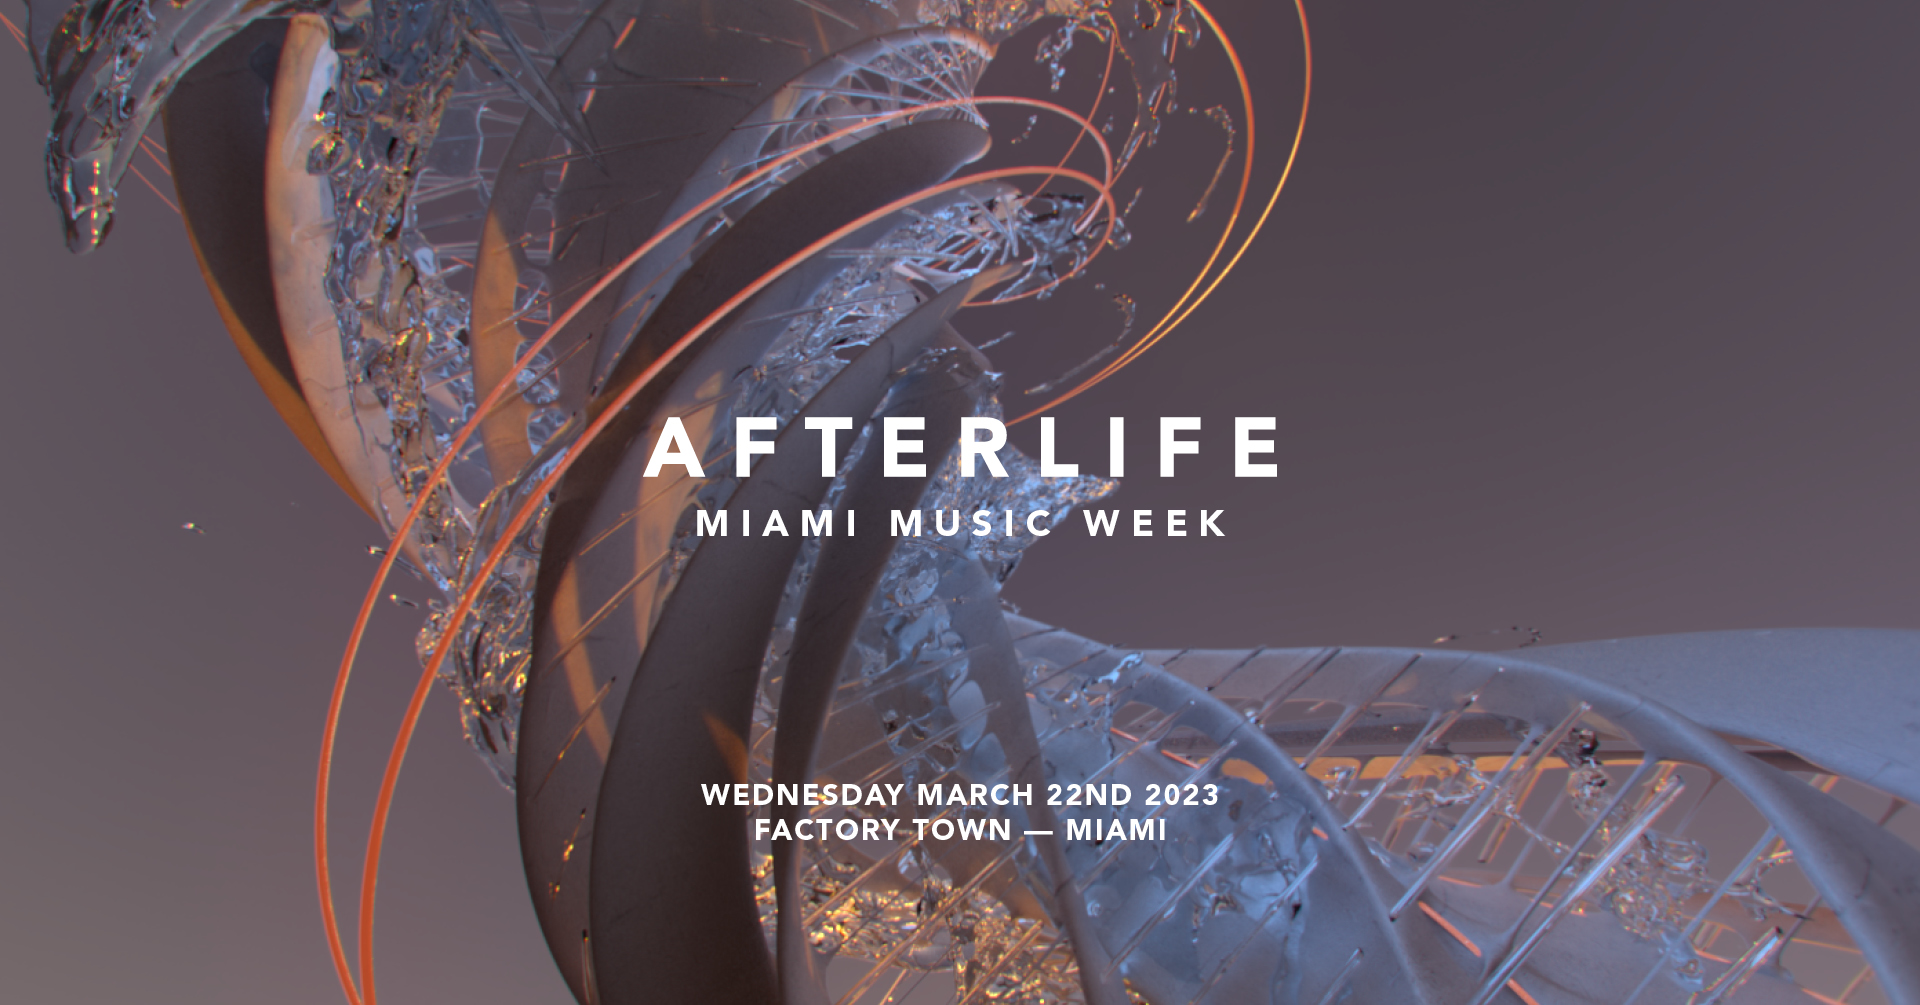 Afterlife Miami Music Week 2023 at Factory Town, Miami